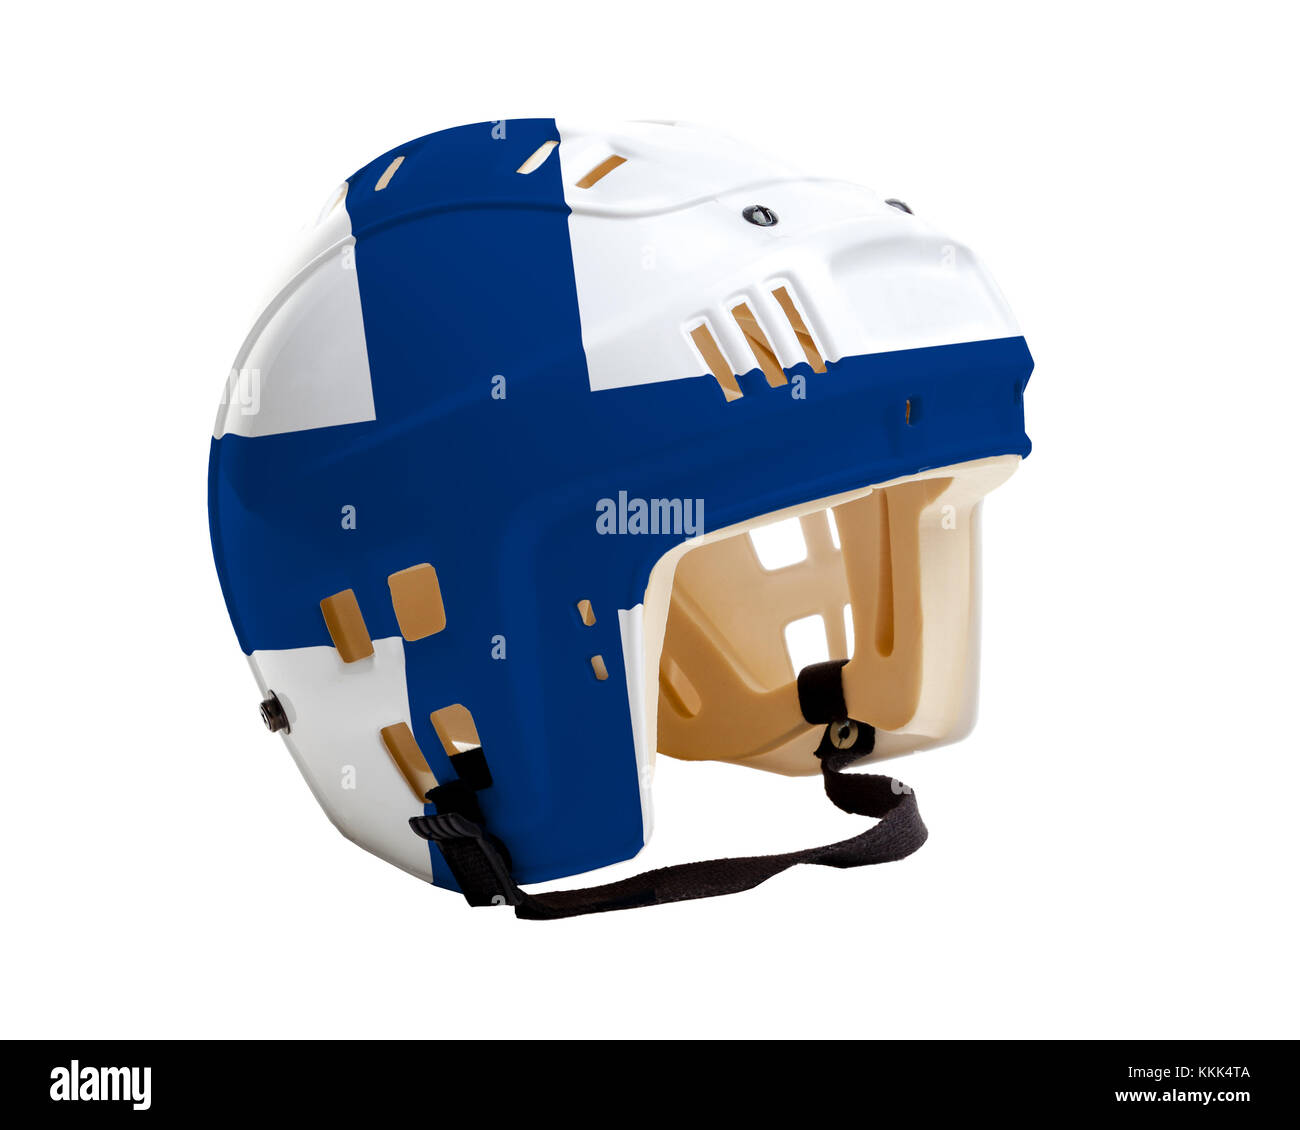 Ice hockey helmet with flag of Finland painted on it. Isolated on white background. Finland is one of the world's major ice hockey nations. Stock Photo